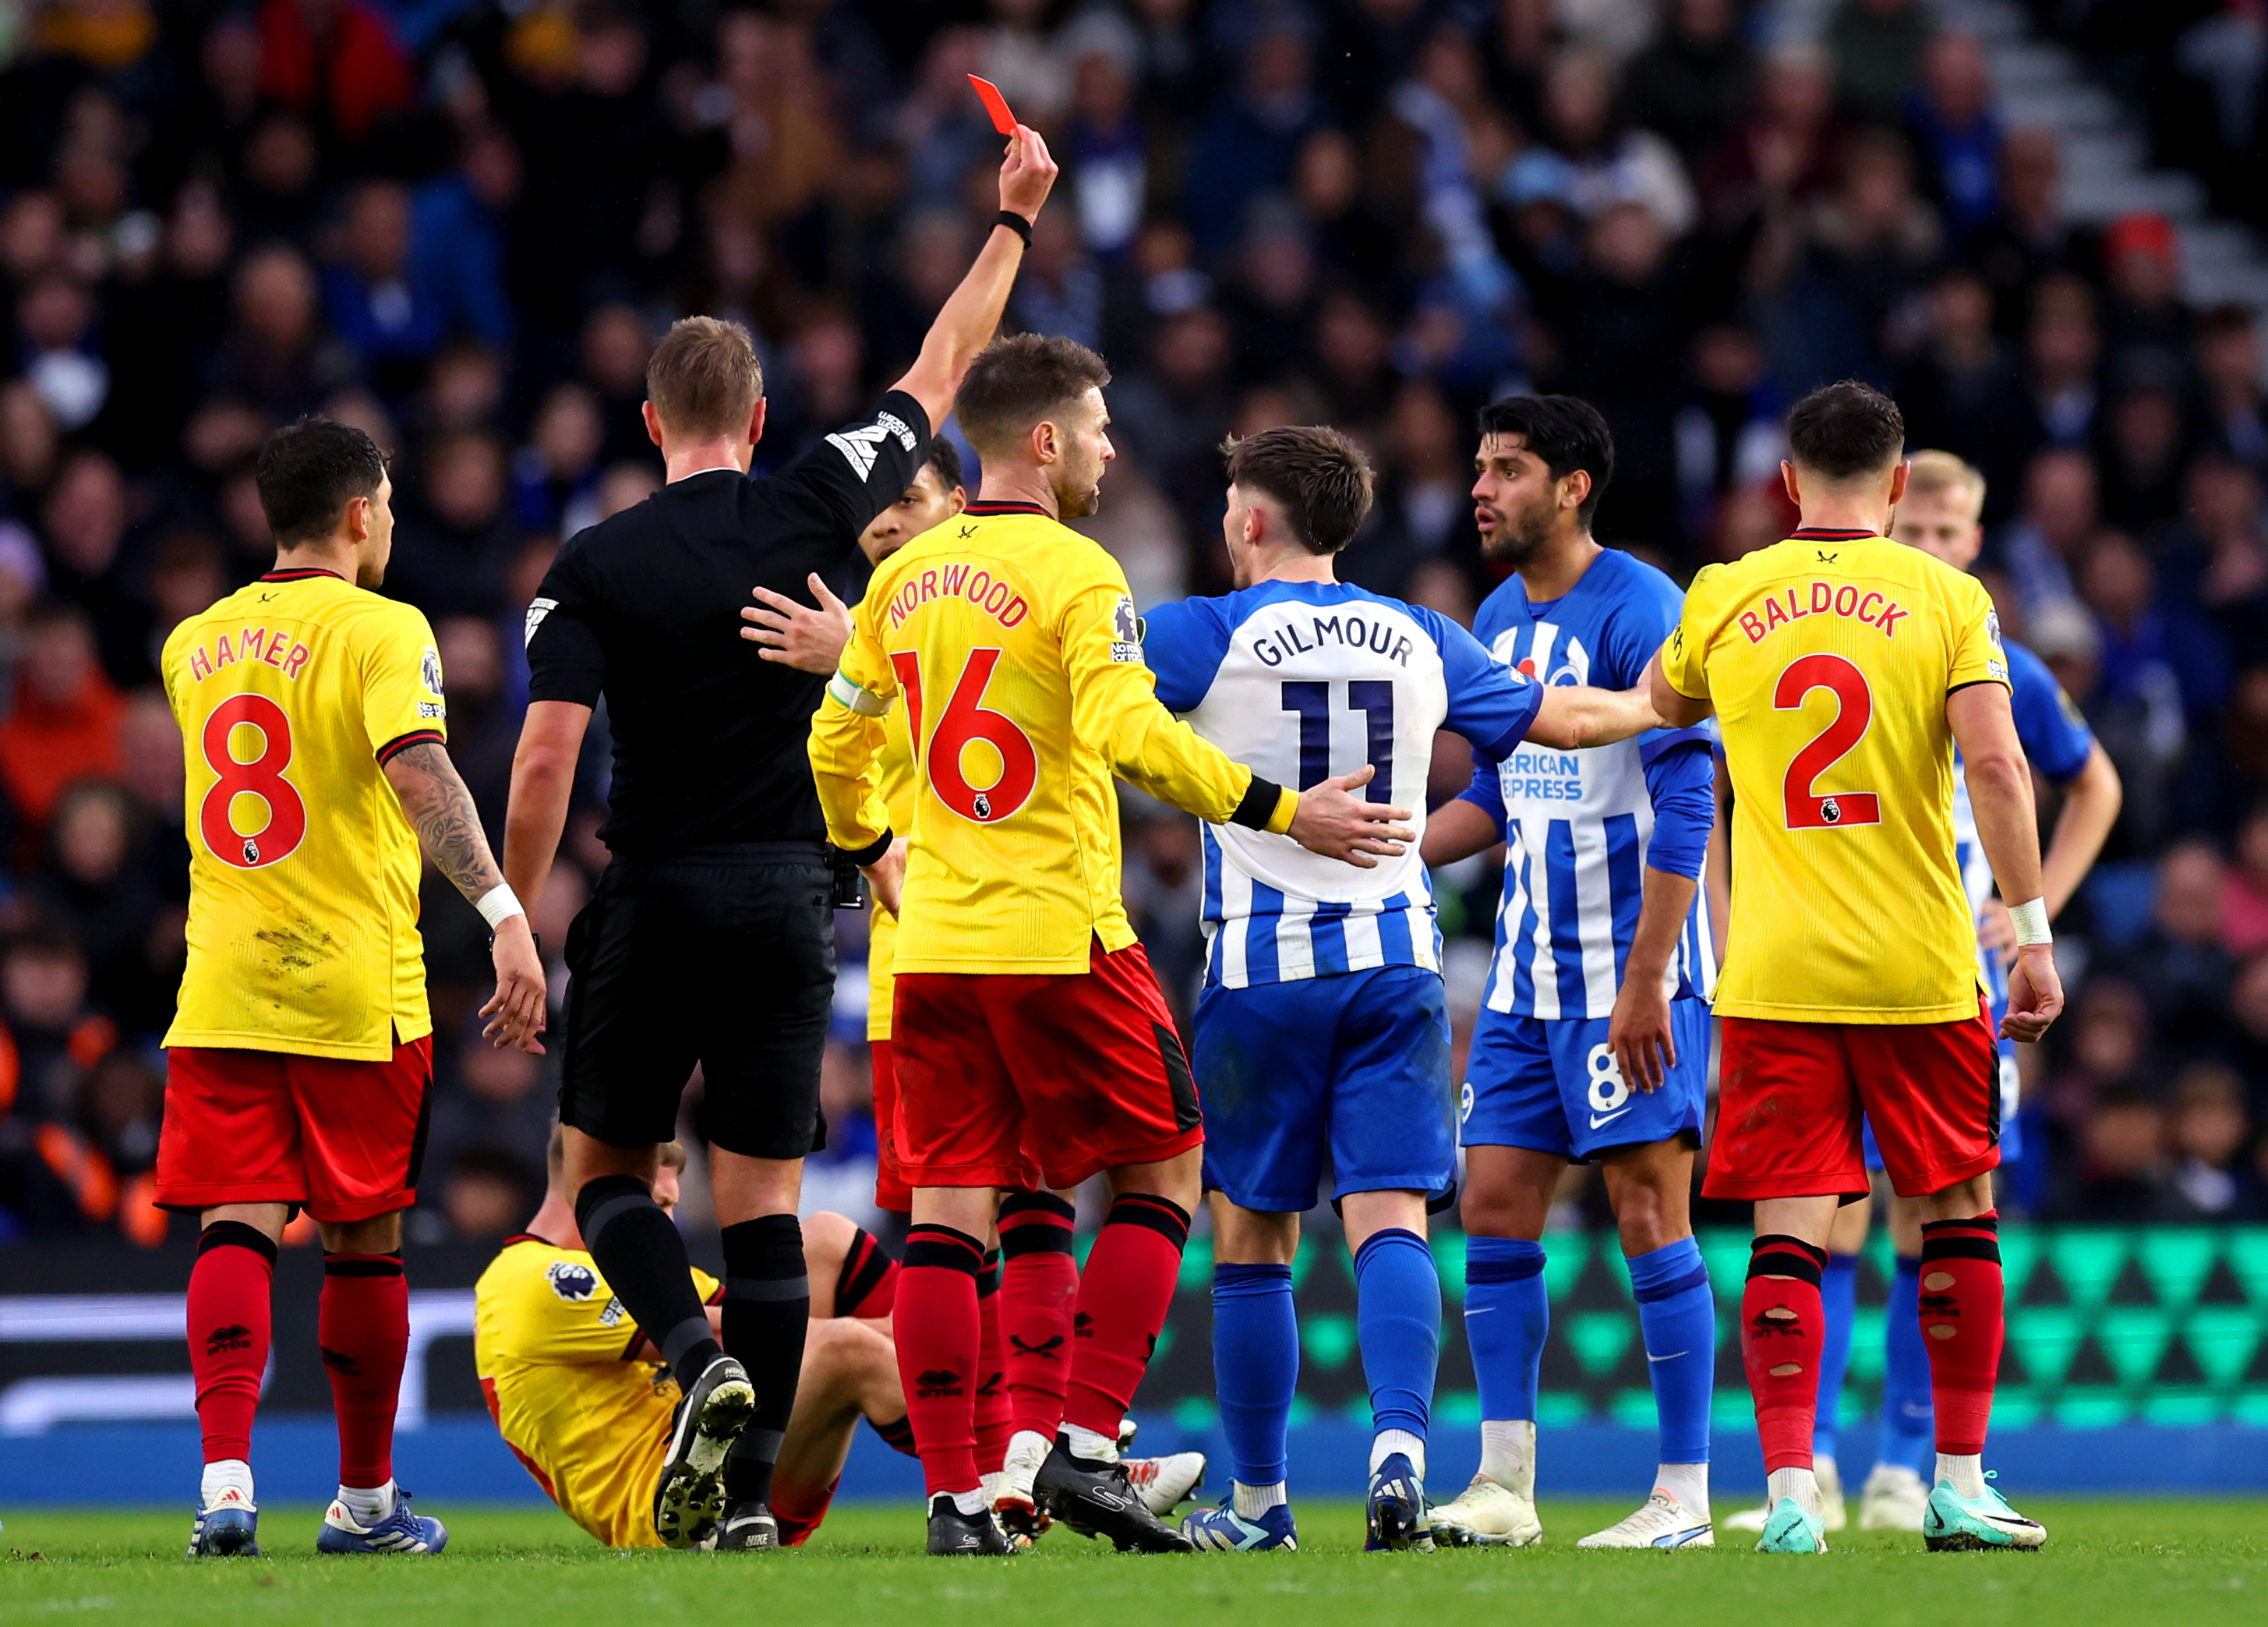 Referee John Brooks, second left, shows a red card to Brighton’s Mahmoud Dahoud, second right